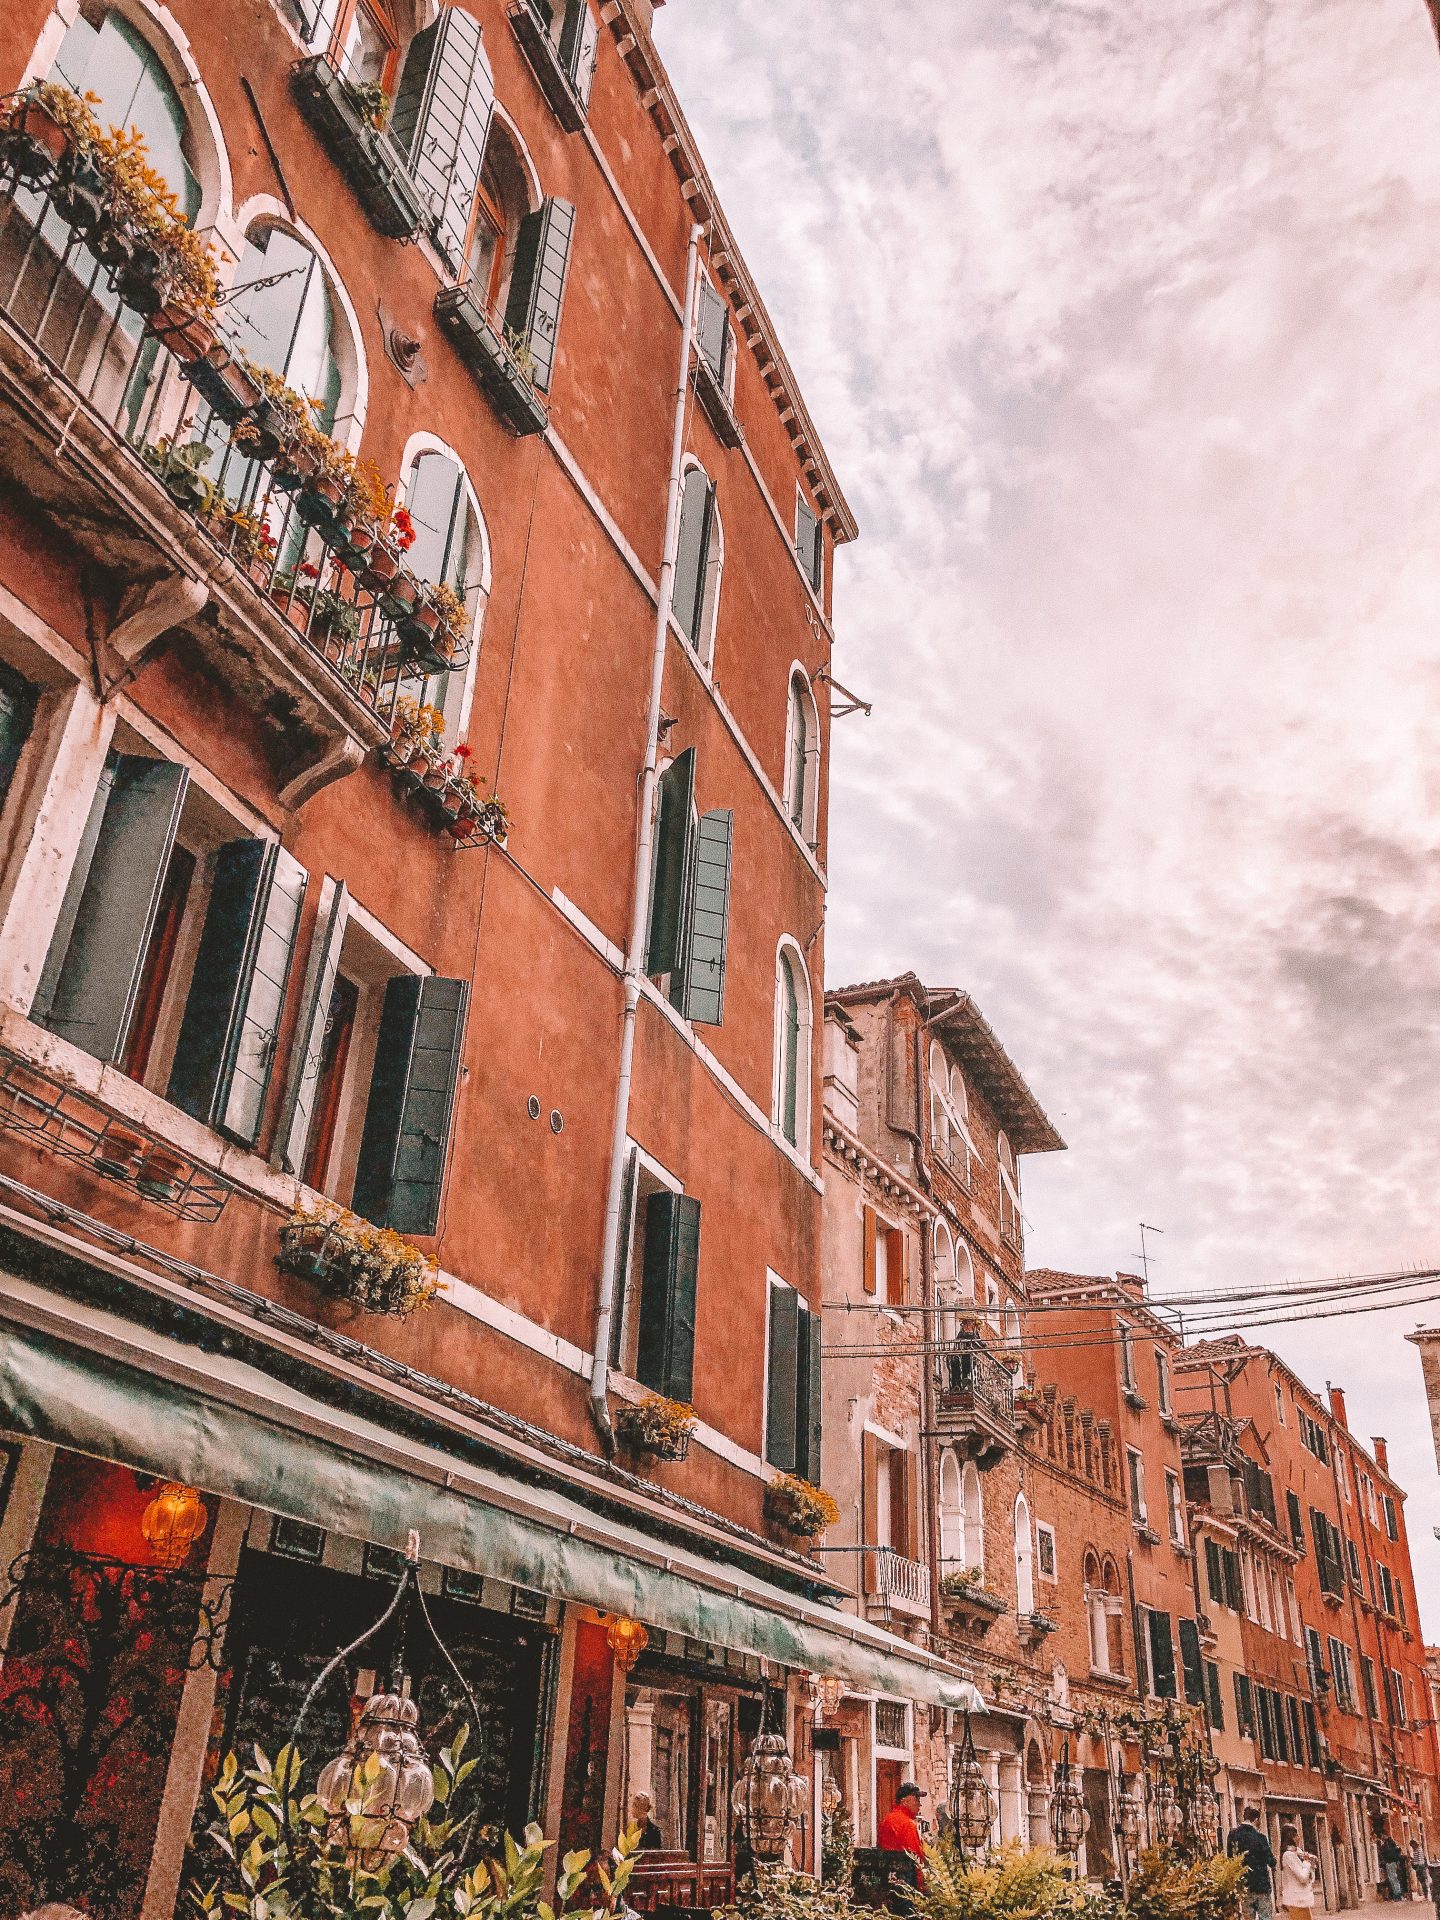 Buildings with a cloudy sky in the background in Venice, Italy